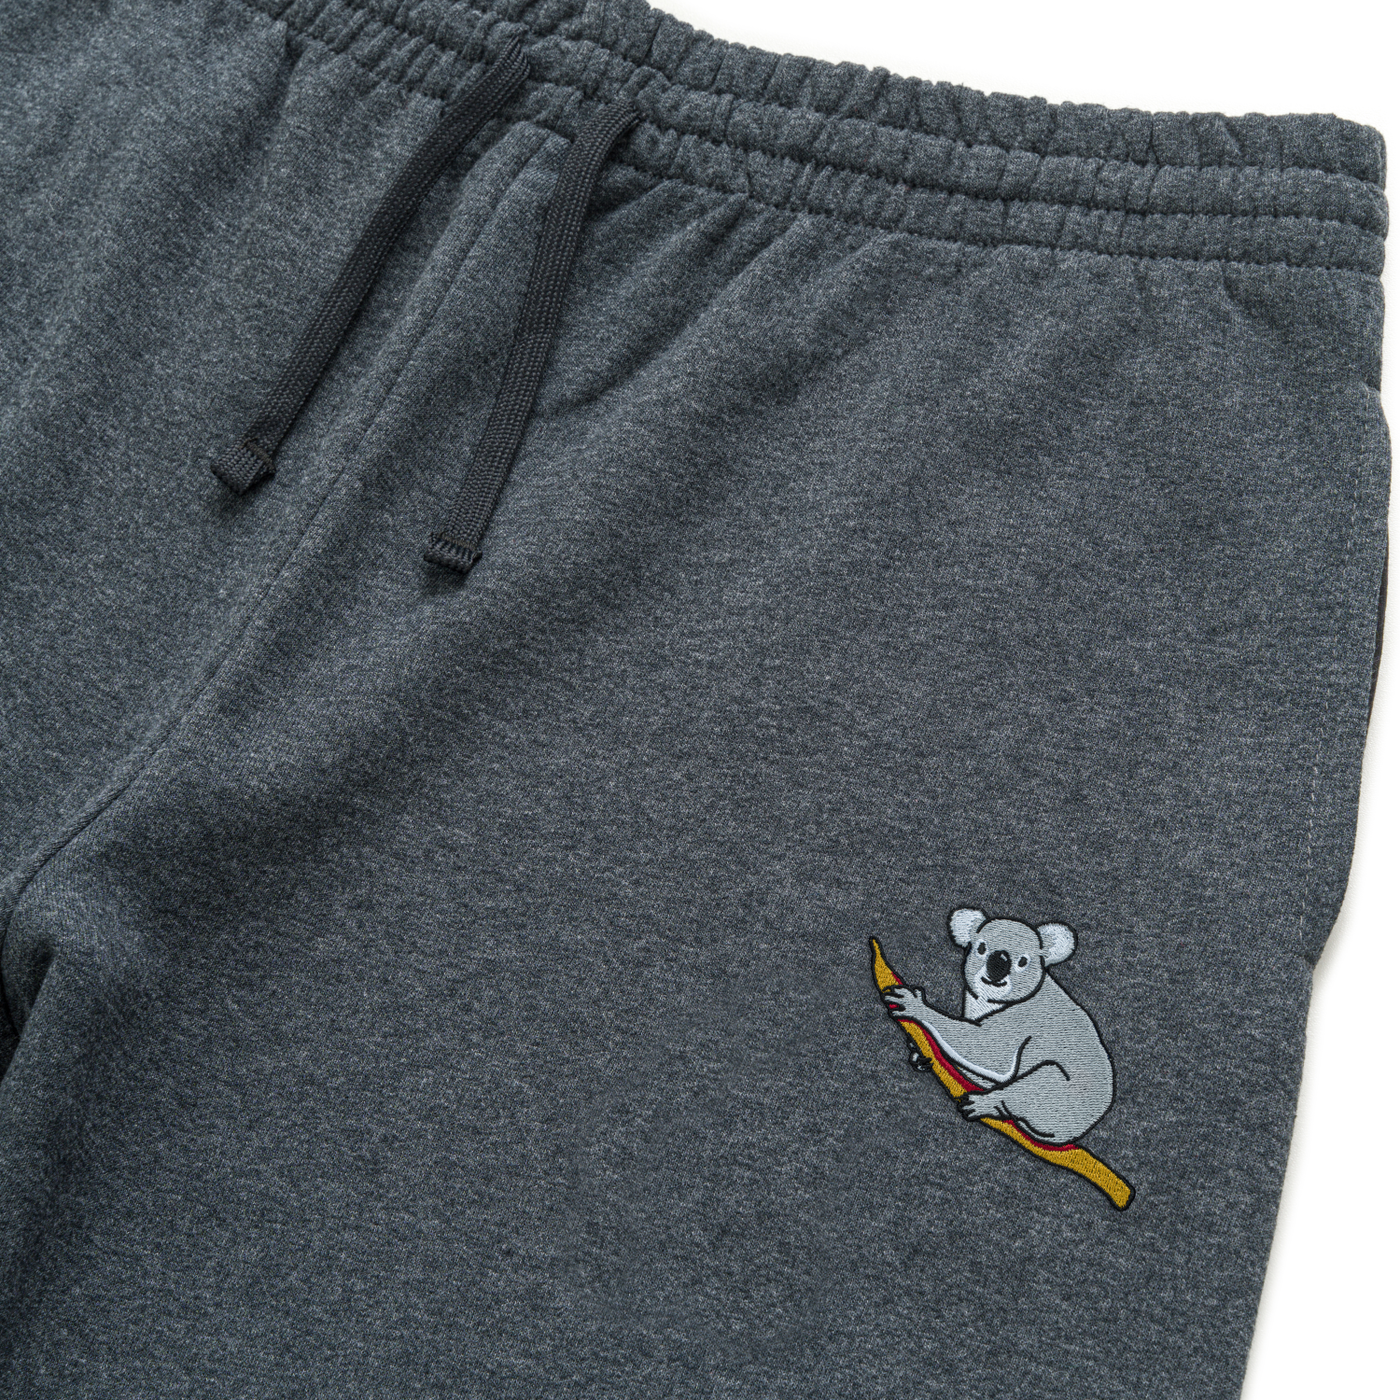 Bobby's Planet Unisex Embroidered Koala Joggers from Australia Down Under Animals Collection in Black Heather Color#color_black-heather